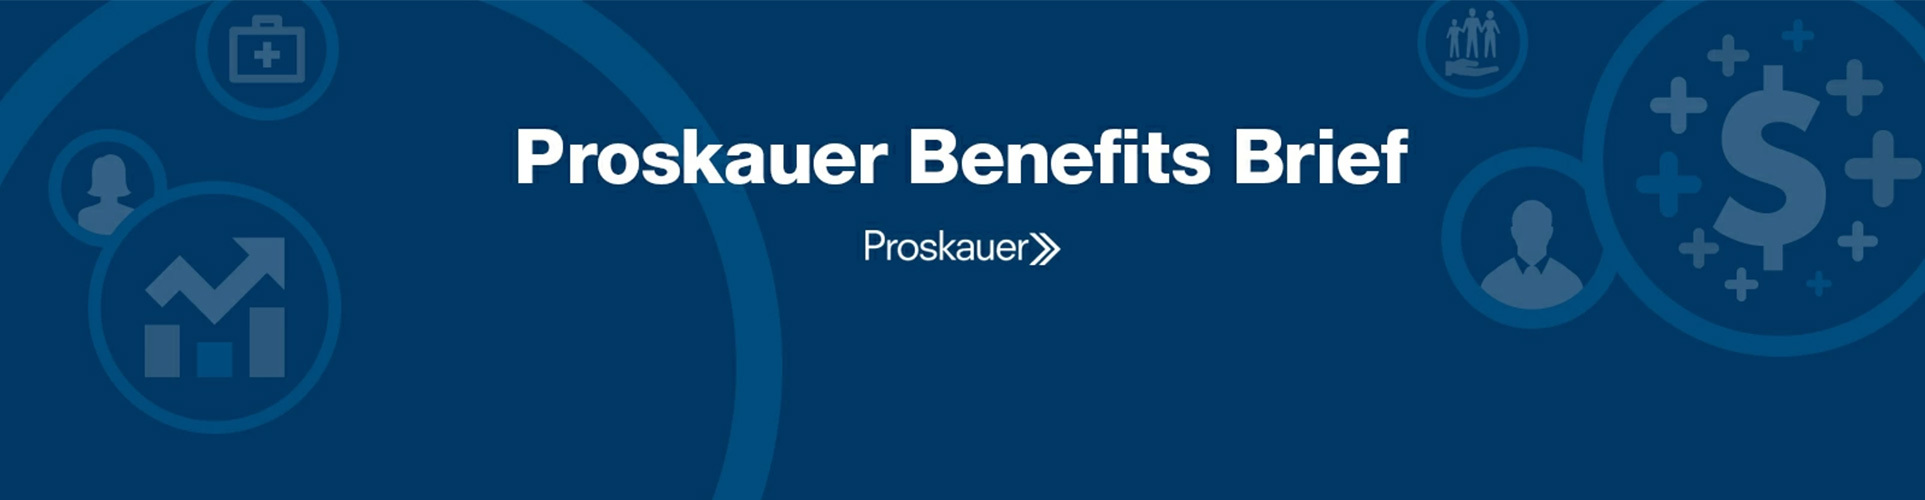 Proskauer Benefits Brief: Legal Insight on Employee Benefits & Executive Compensation